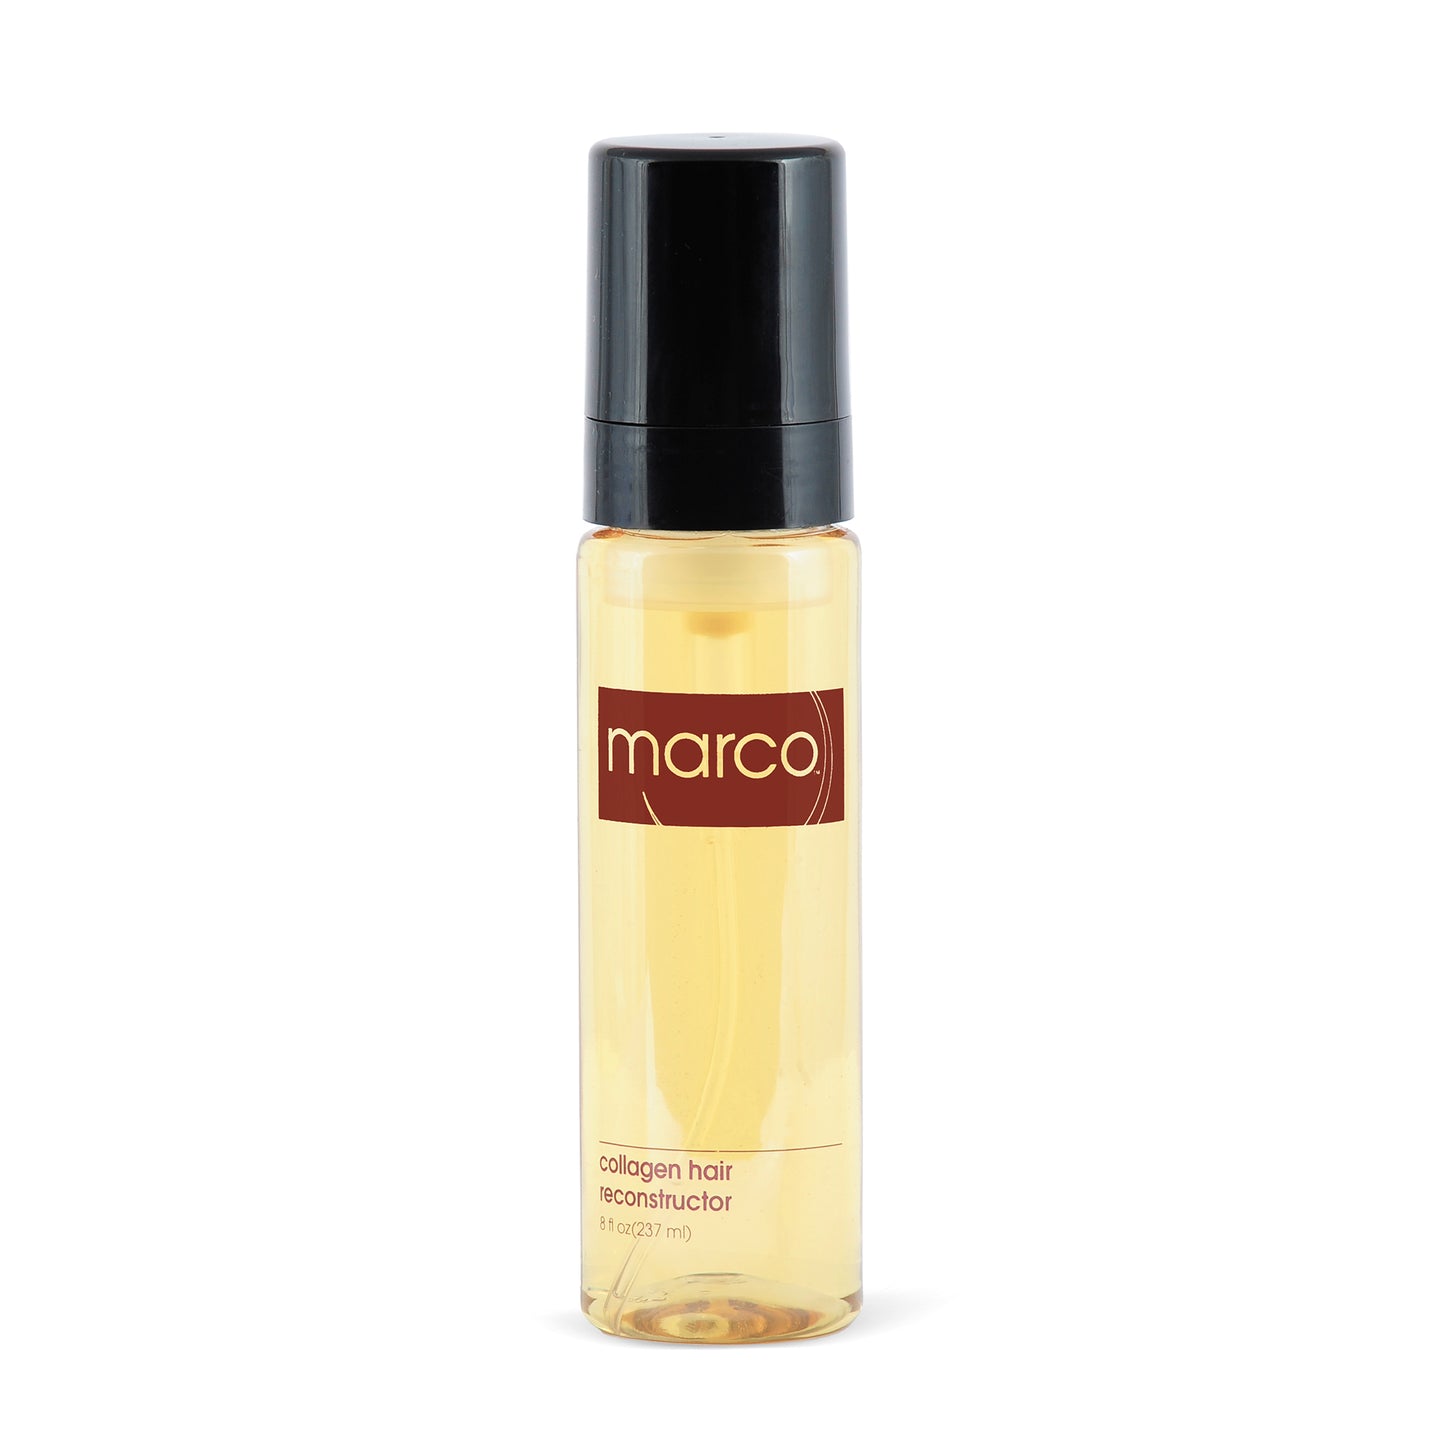 Clear bottle, translucent amber product, “marco, collagen hair reconstructor”